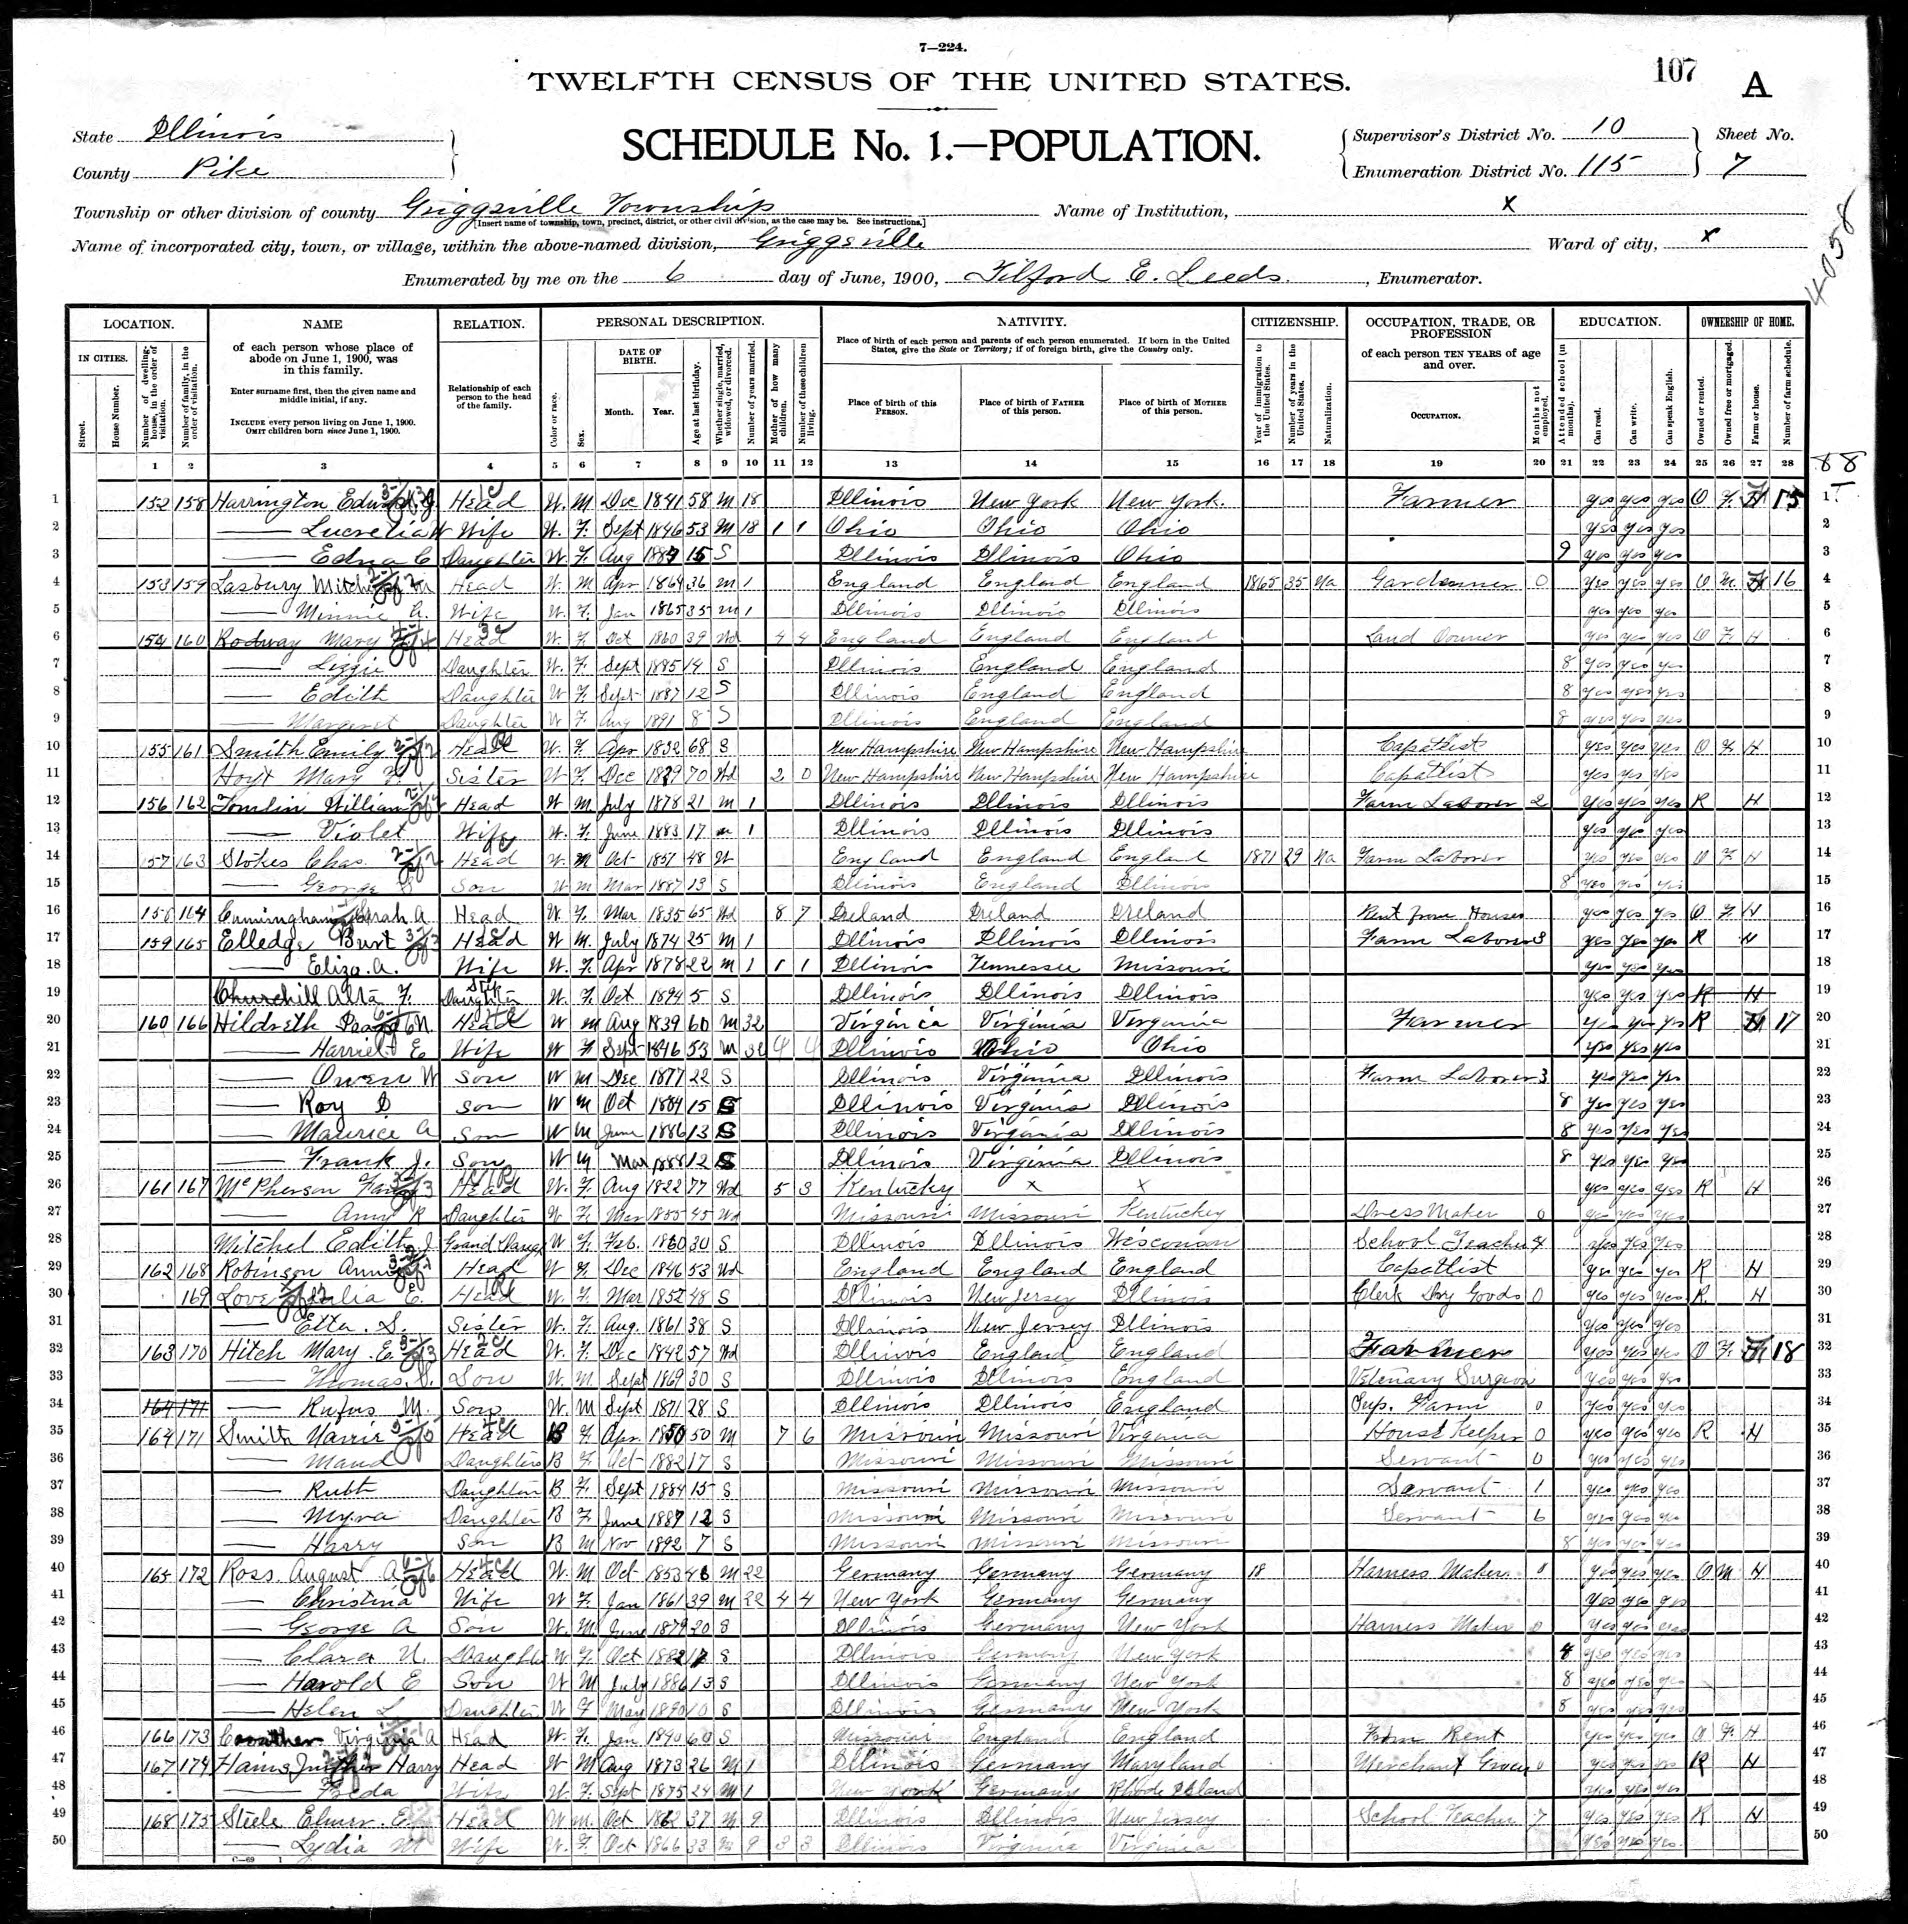 1900 census: widow Mary Rodway, daughters Lizzie, Edith and Margaret plus brother Mitchener Lasbury and wife Minnie next door.